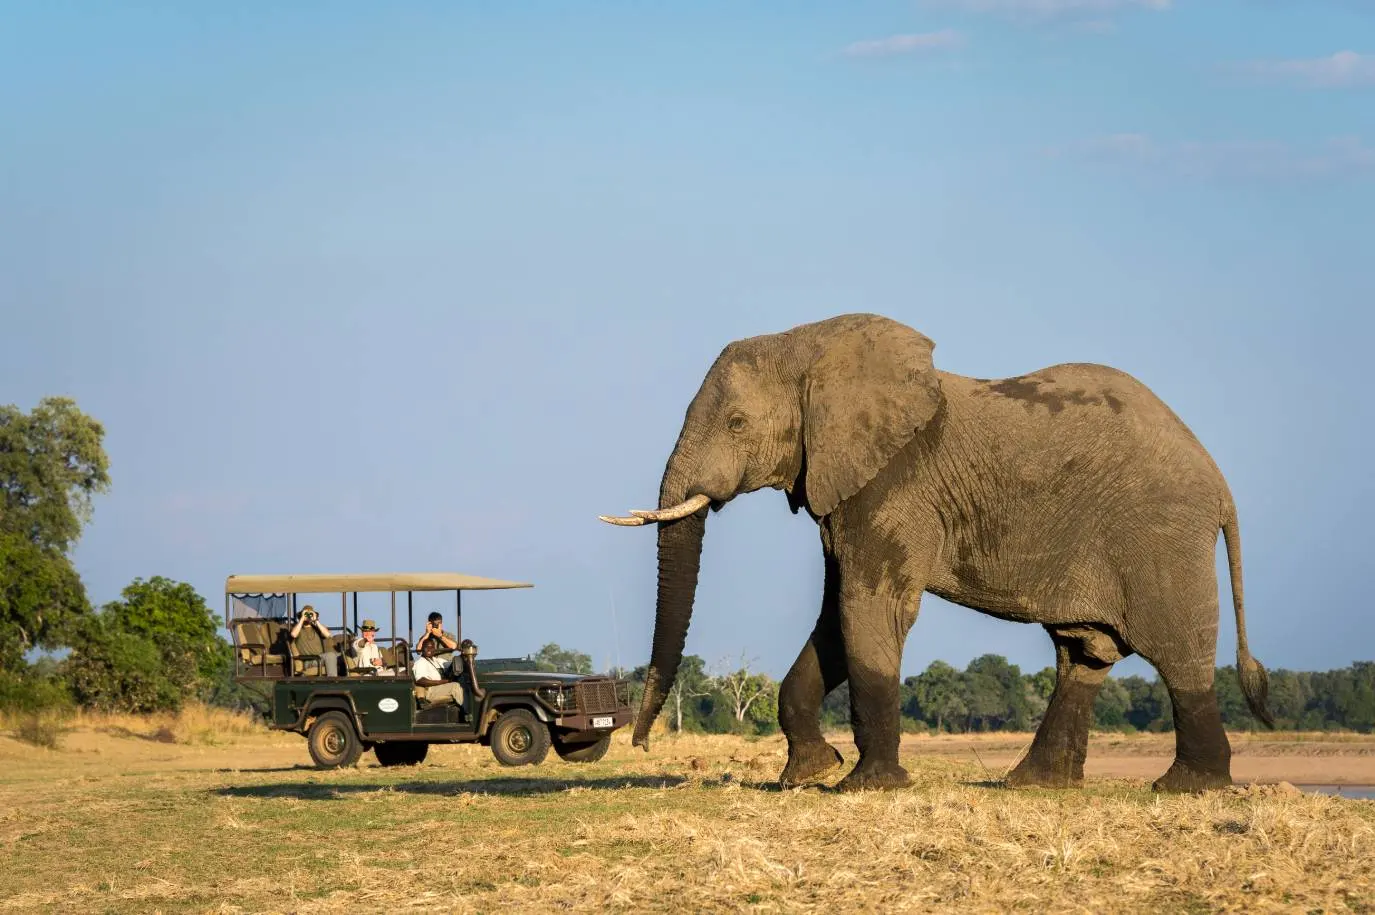 6-Day Discover Zambia’s Iconic South Luangwa National Park Safari